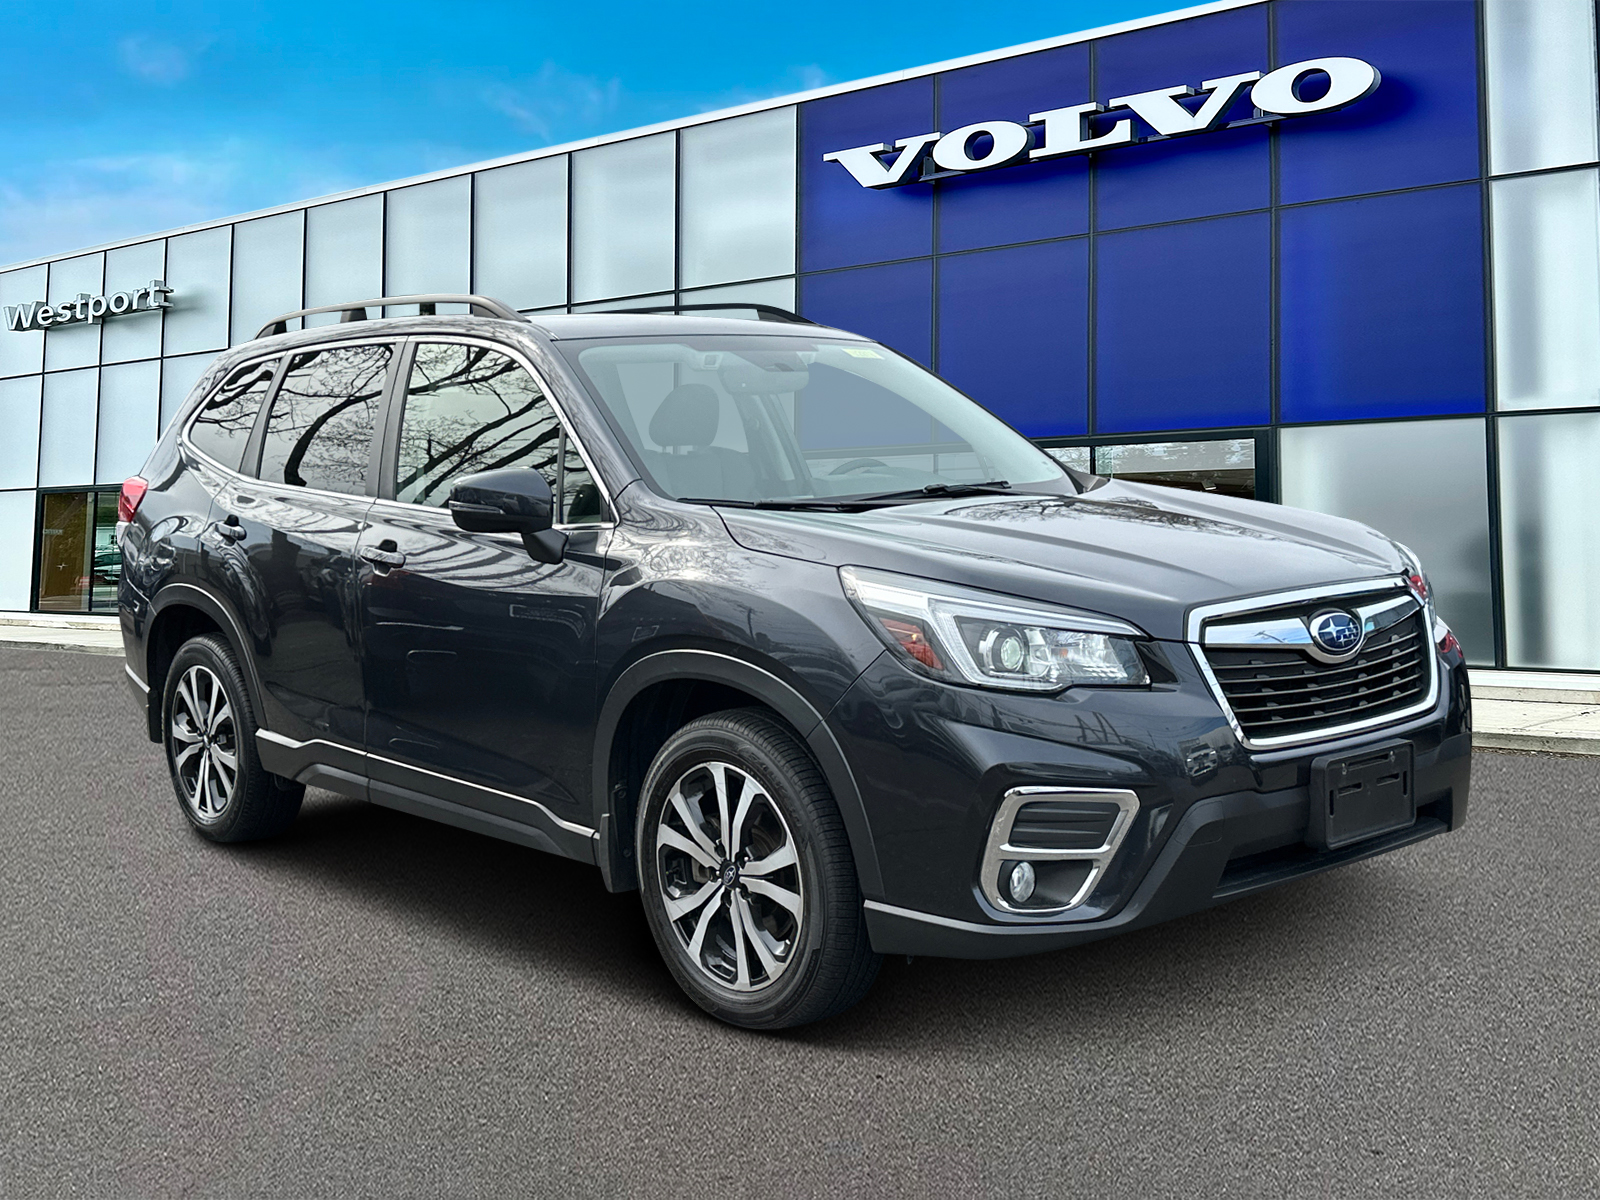 2019 Subaru Forester Limited 1